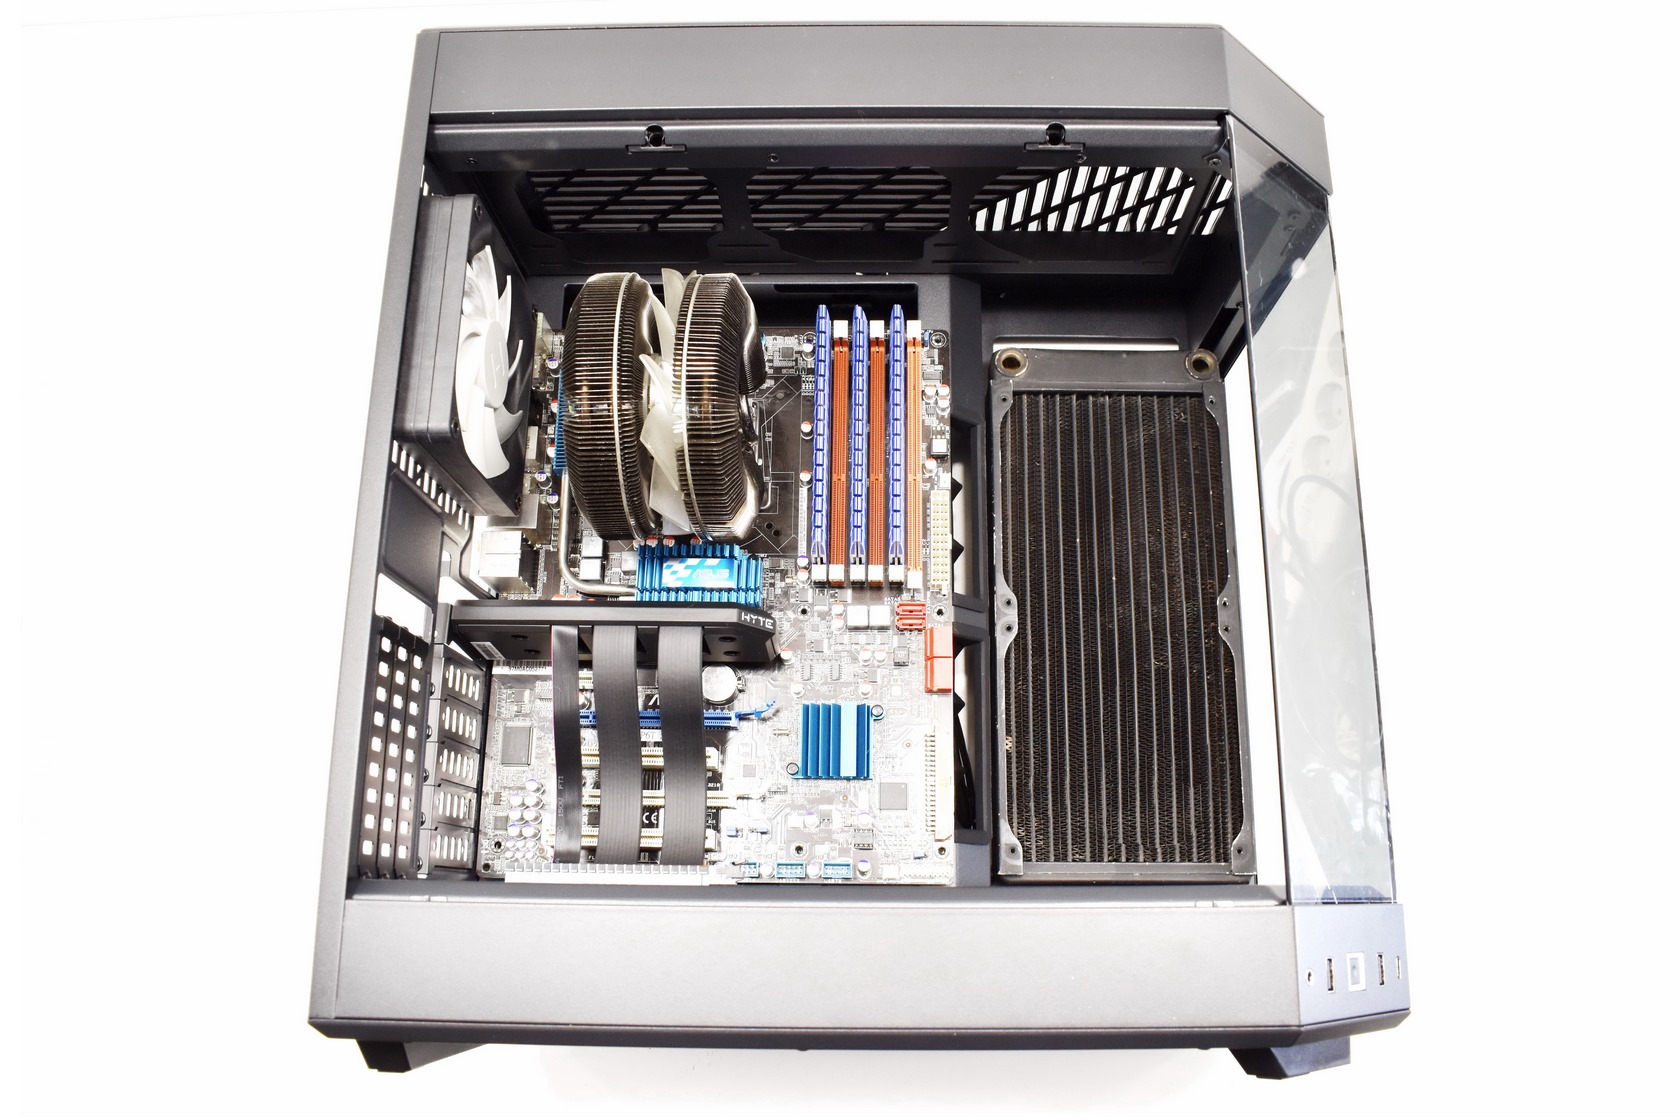 HYTE Y60 Panoramic PC Case Review